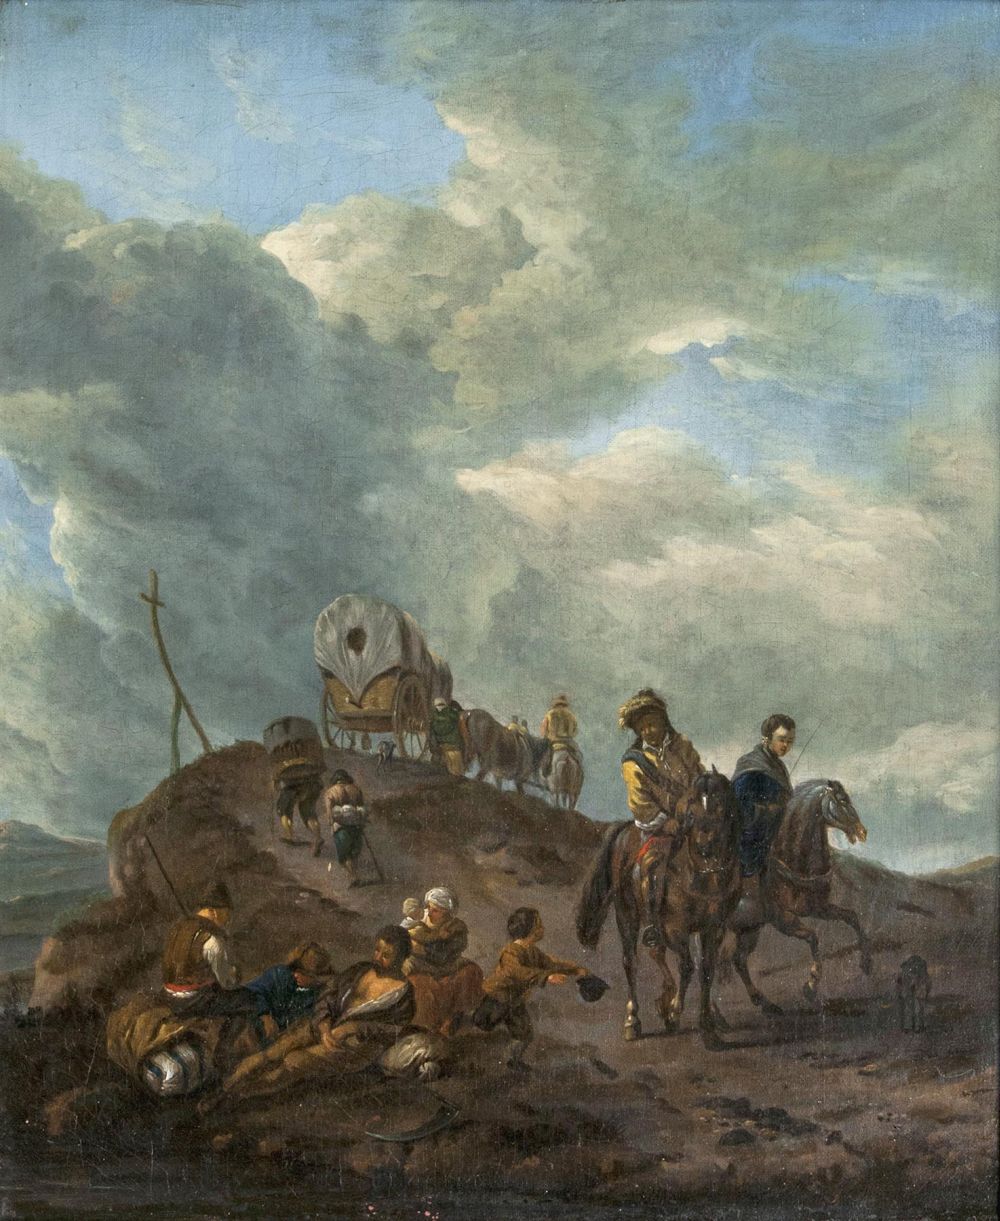 Carriage and Riders on a Mountain Top